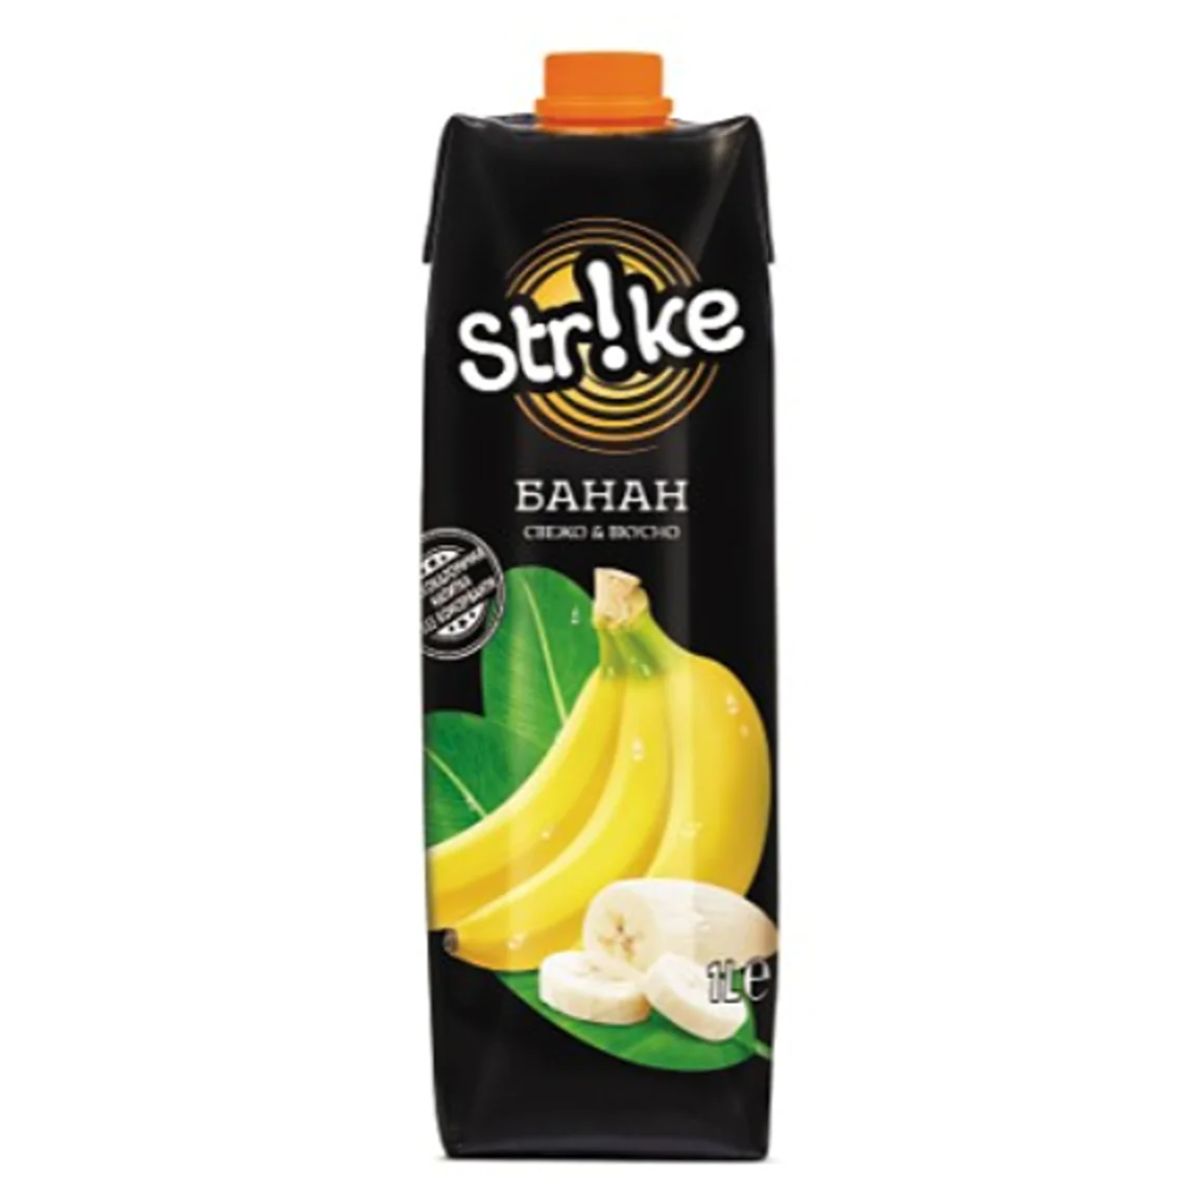 Carton of Strike - Banana Juice - 1L with branding and a picture of bananas on the front.